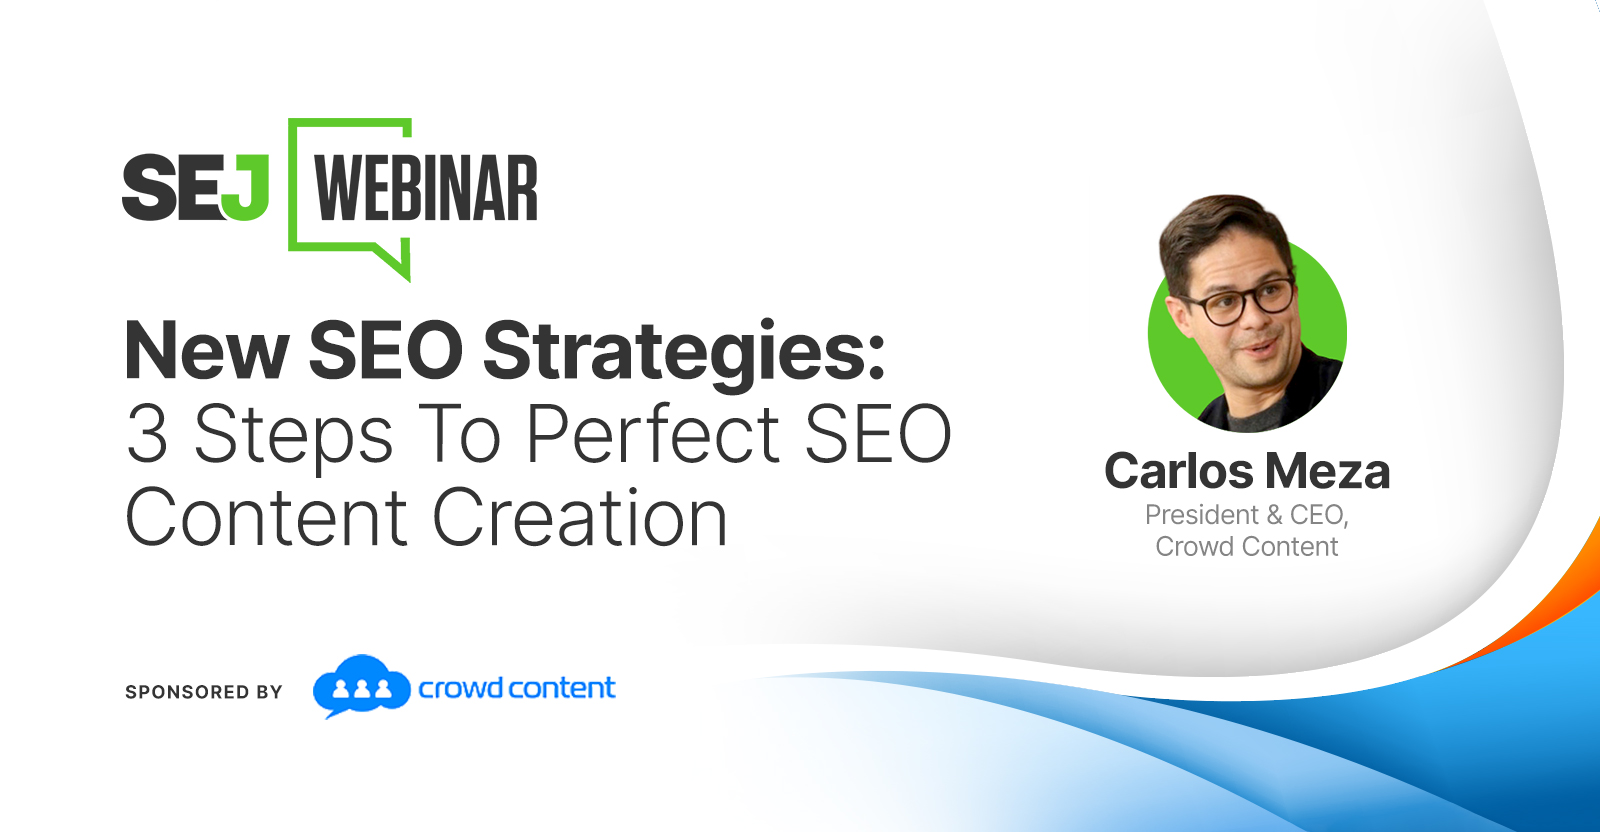 3 Steps To Perfect SEO Content Creation